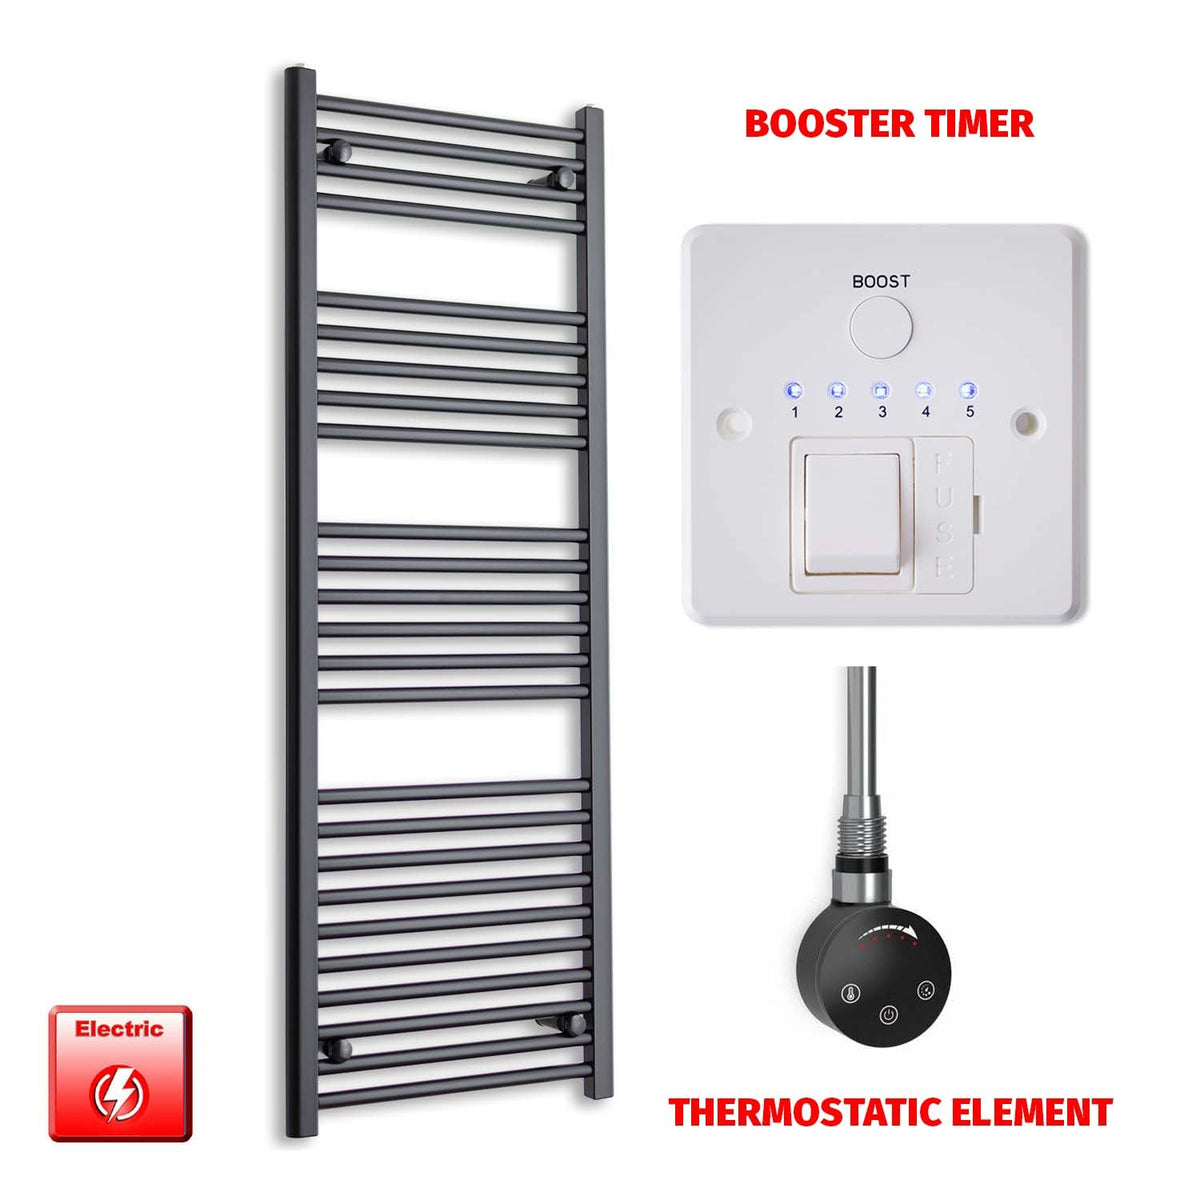 1400 x 550mm Wide Flat Black Pre-Filled Electric Heated Towel Radiator HTR SMART Thermostatic Booster Timer